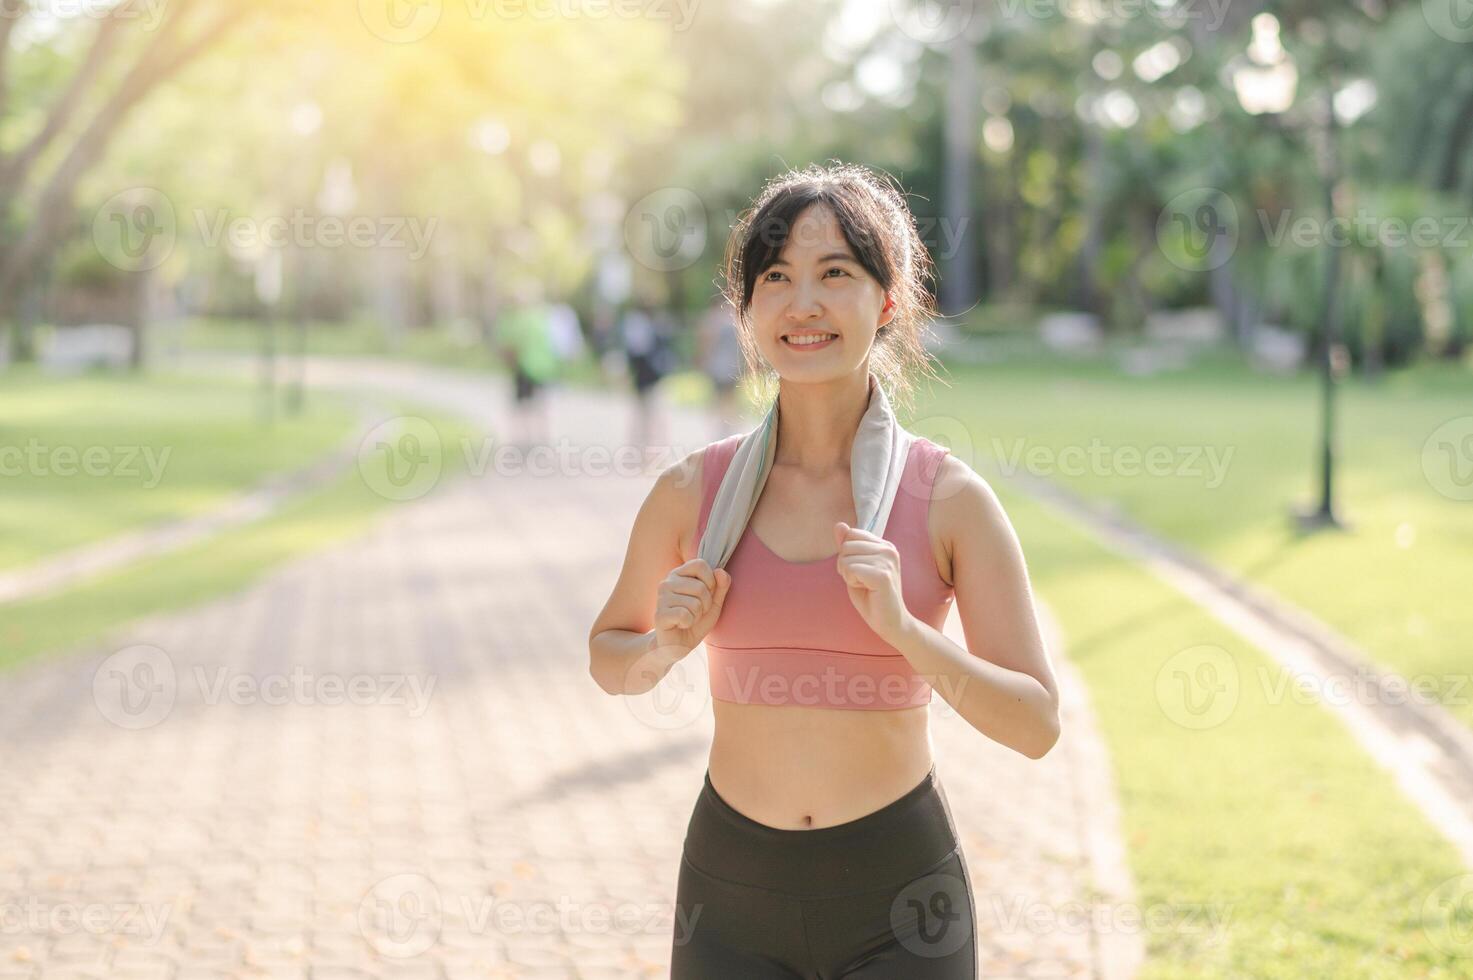 Fit happy smile 30s young Asian woman in sportswear enjoys refreshing sunset run in nature. The silhouette of figure against the setting sun is beautiful sight. Fitness, health, or motivation concept. photo